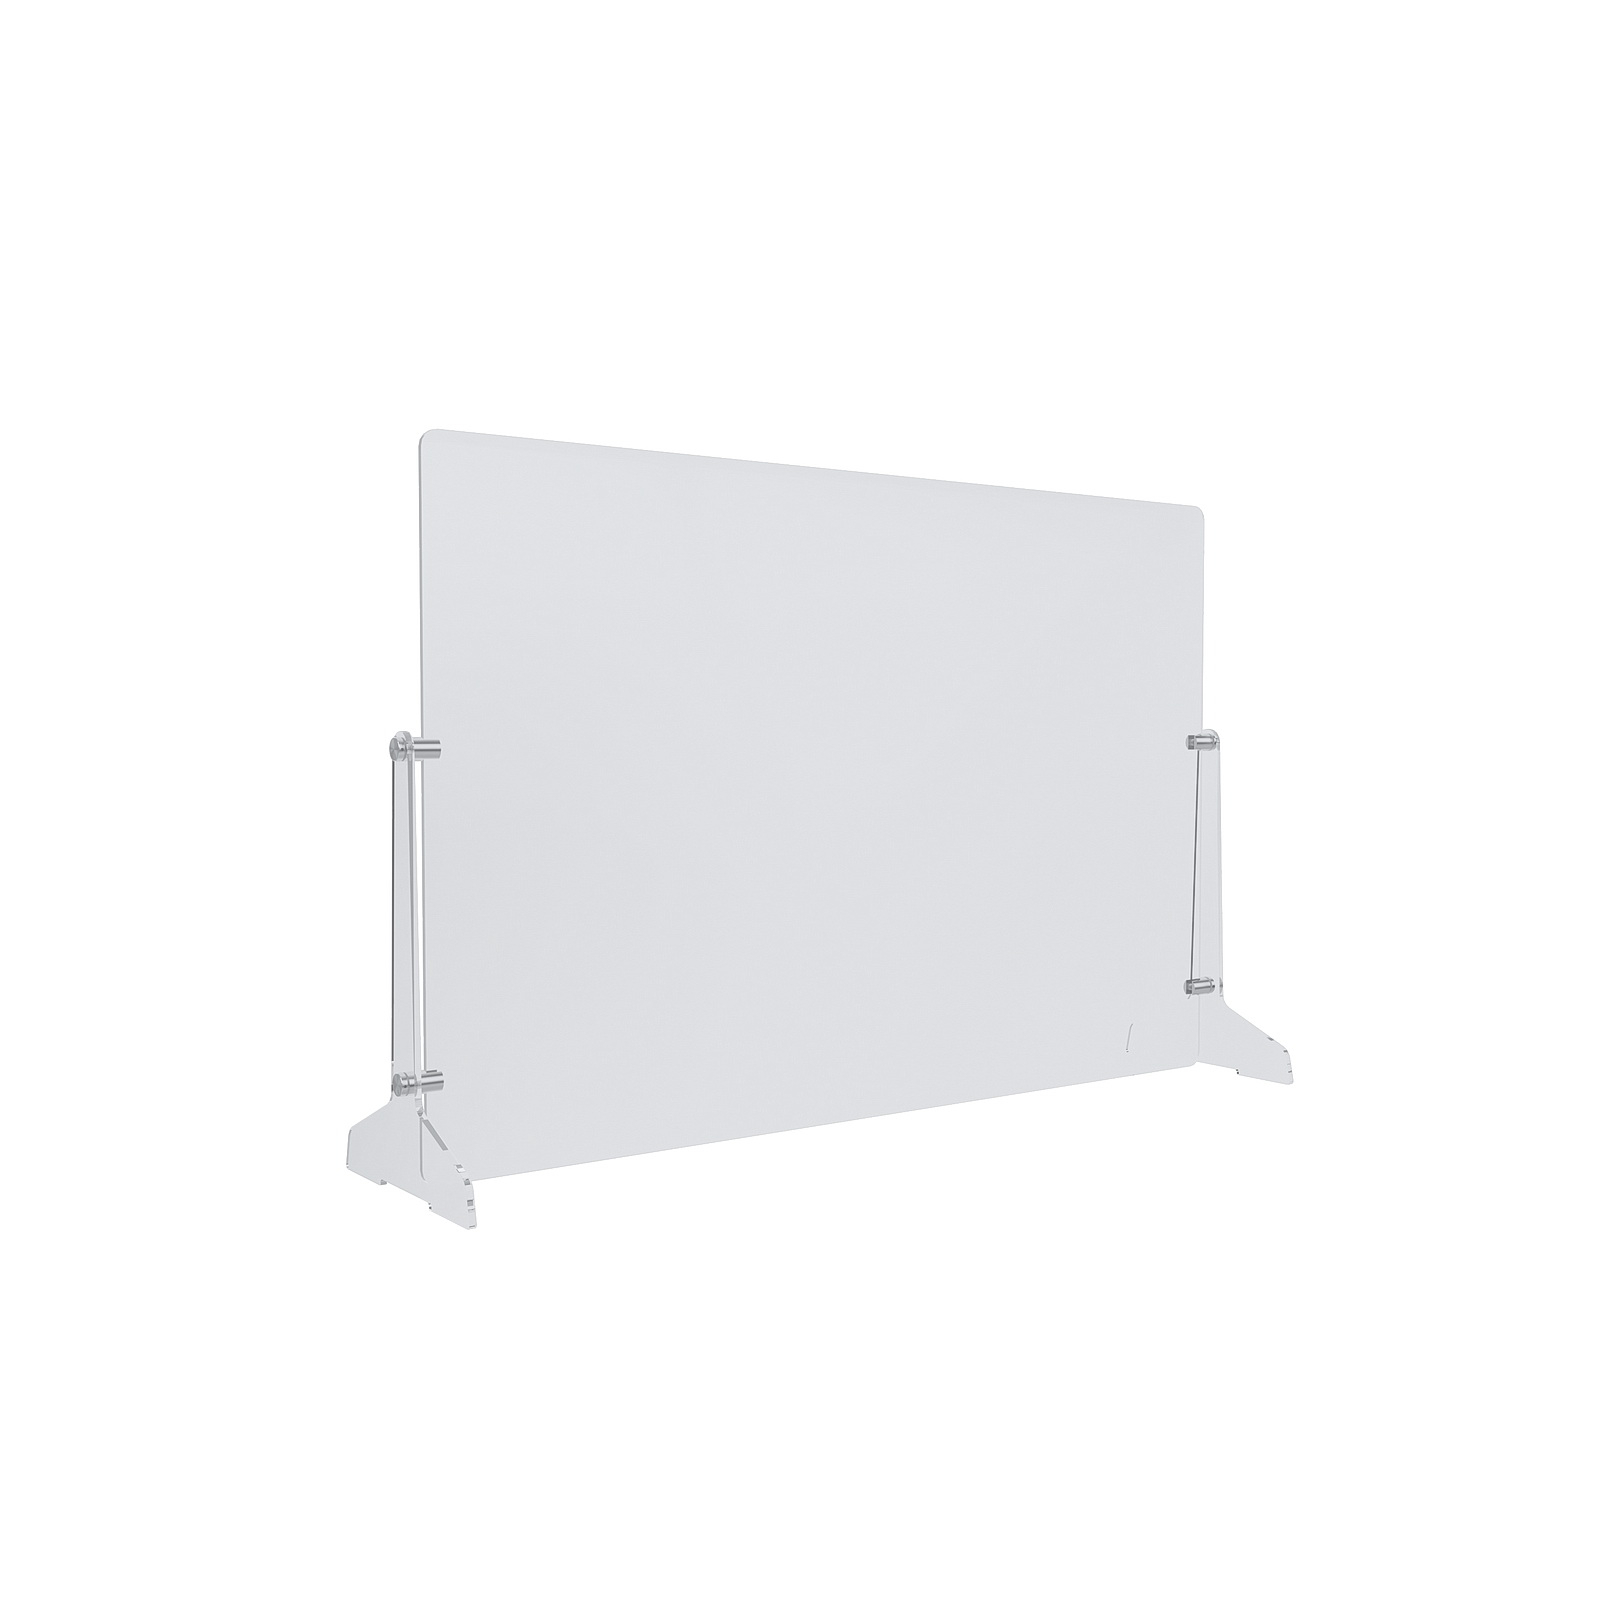 Clear Acrylic Sneeze Guard 30'' Wide x 20'' Tall, with (2) 7'' Wide x 12-5/16'' Deep Feet on the Side, and (4) Aluminum Clear Anodized Forks / Standoffs.